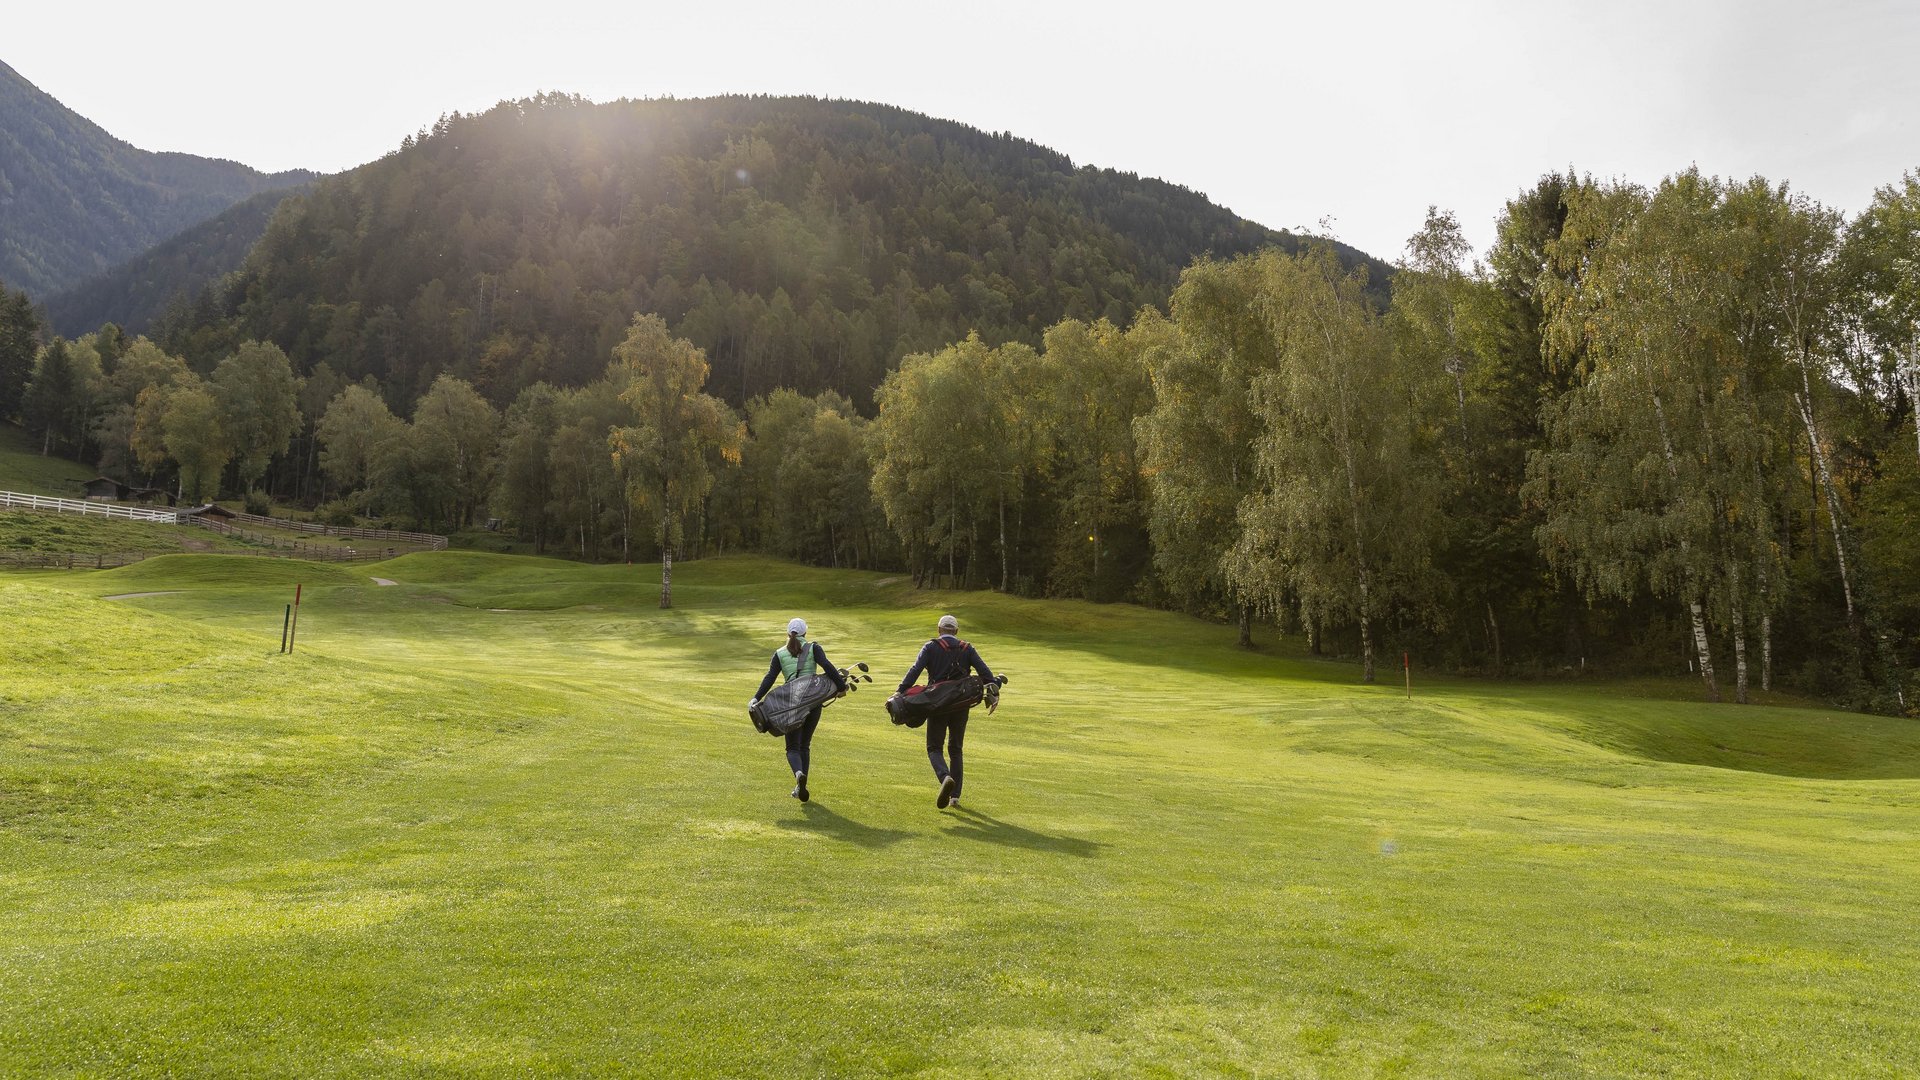 The Stroblhof, your golf hotel in South Tyrol